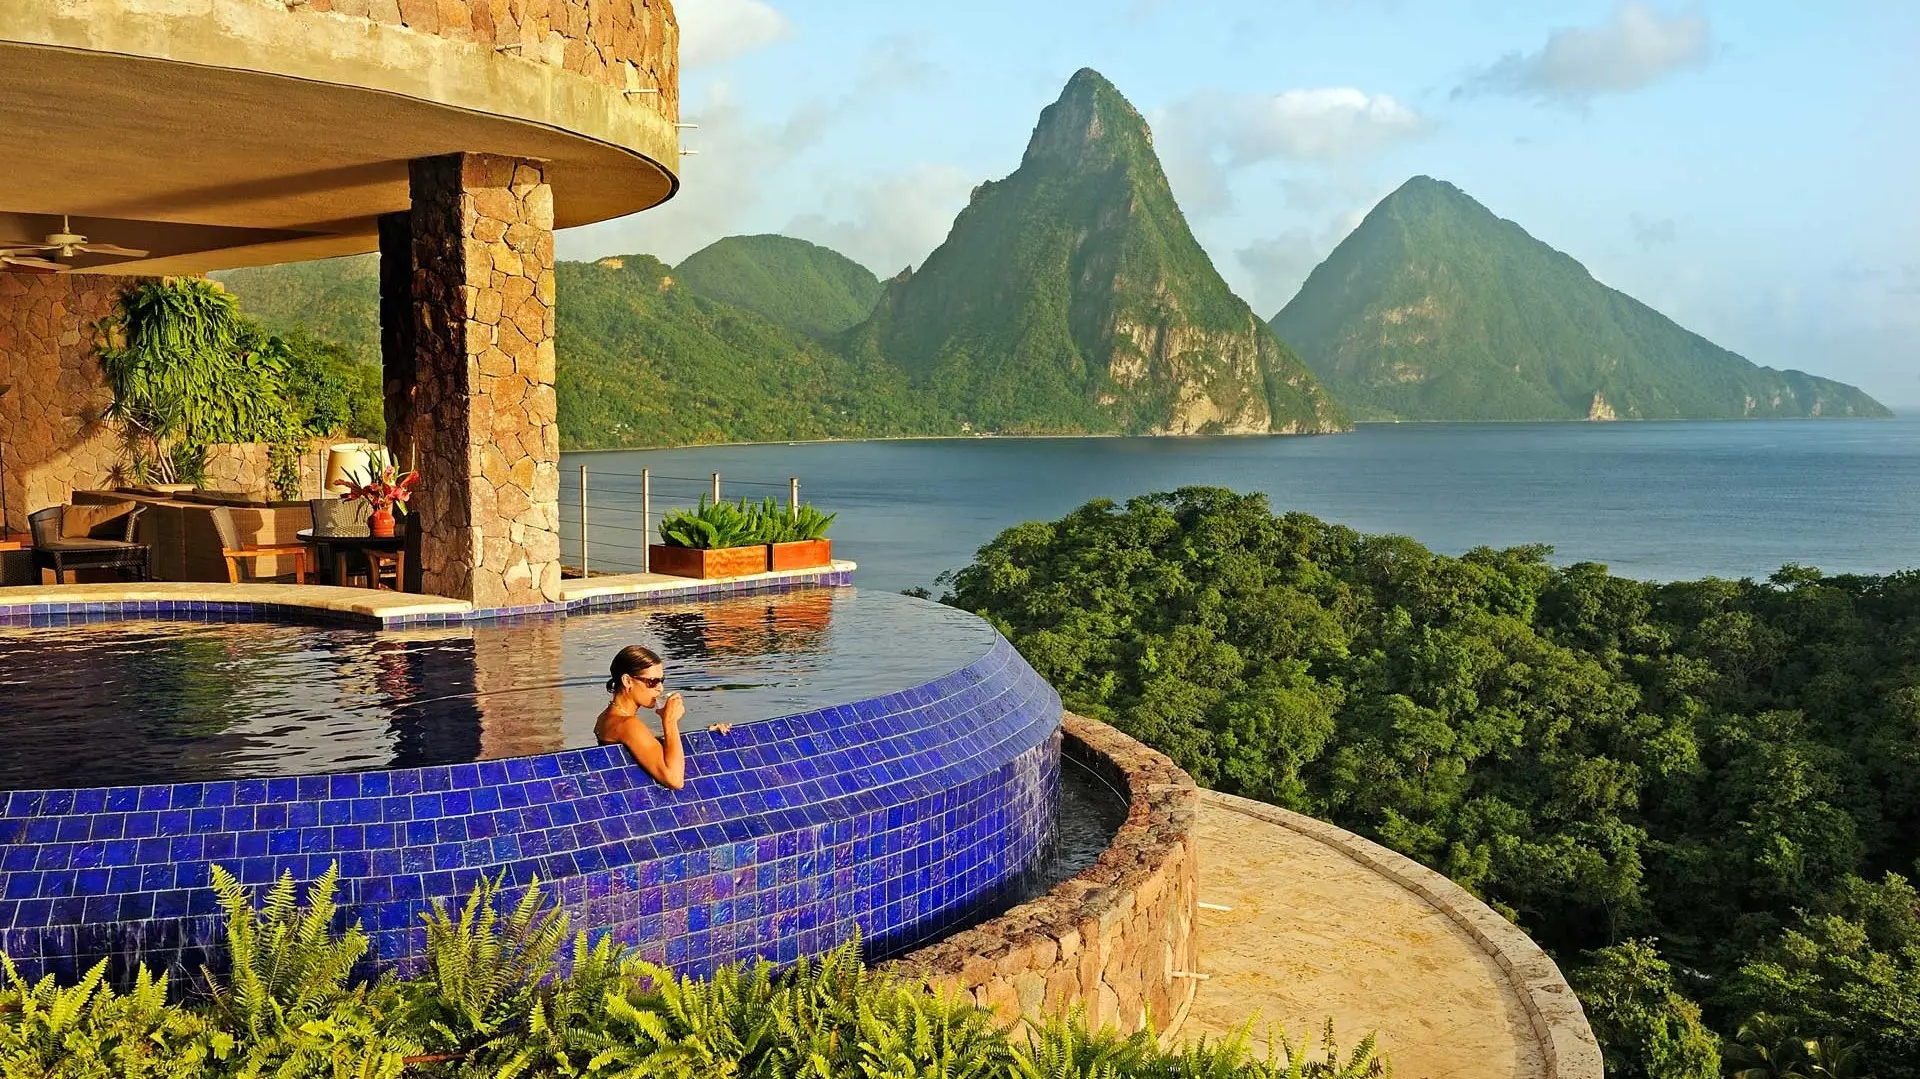 Hotel review Service & Facilities' - Jade Mountain - 3